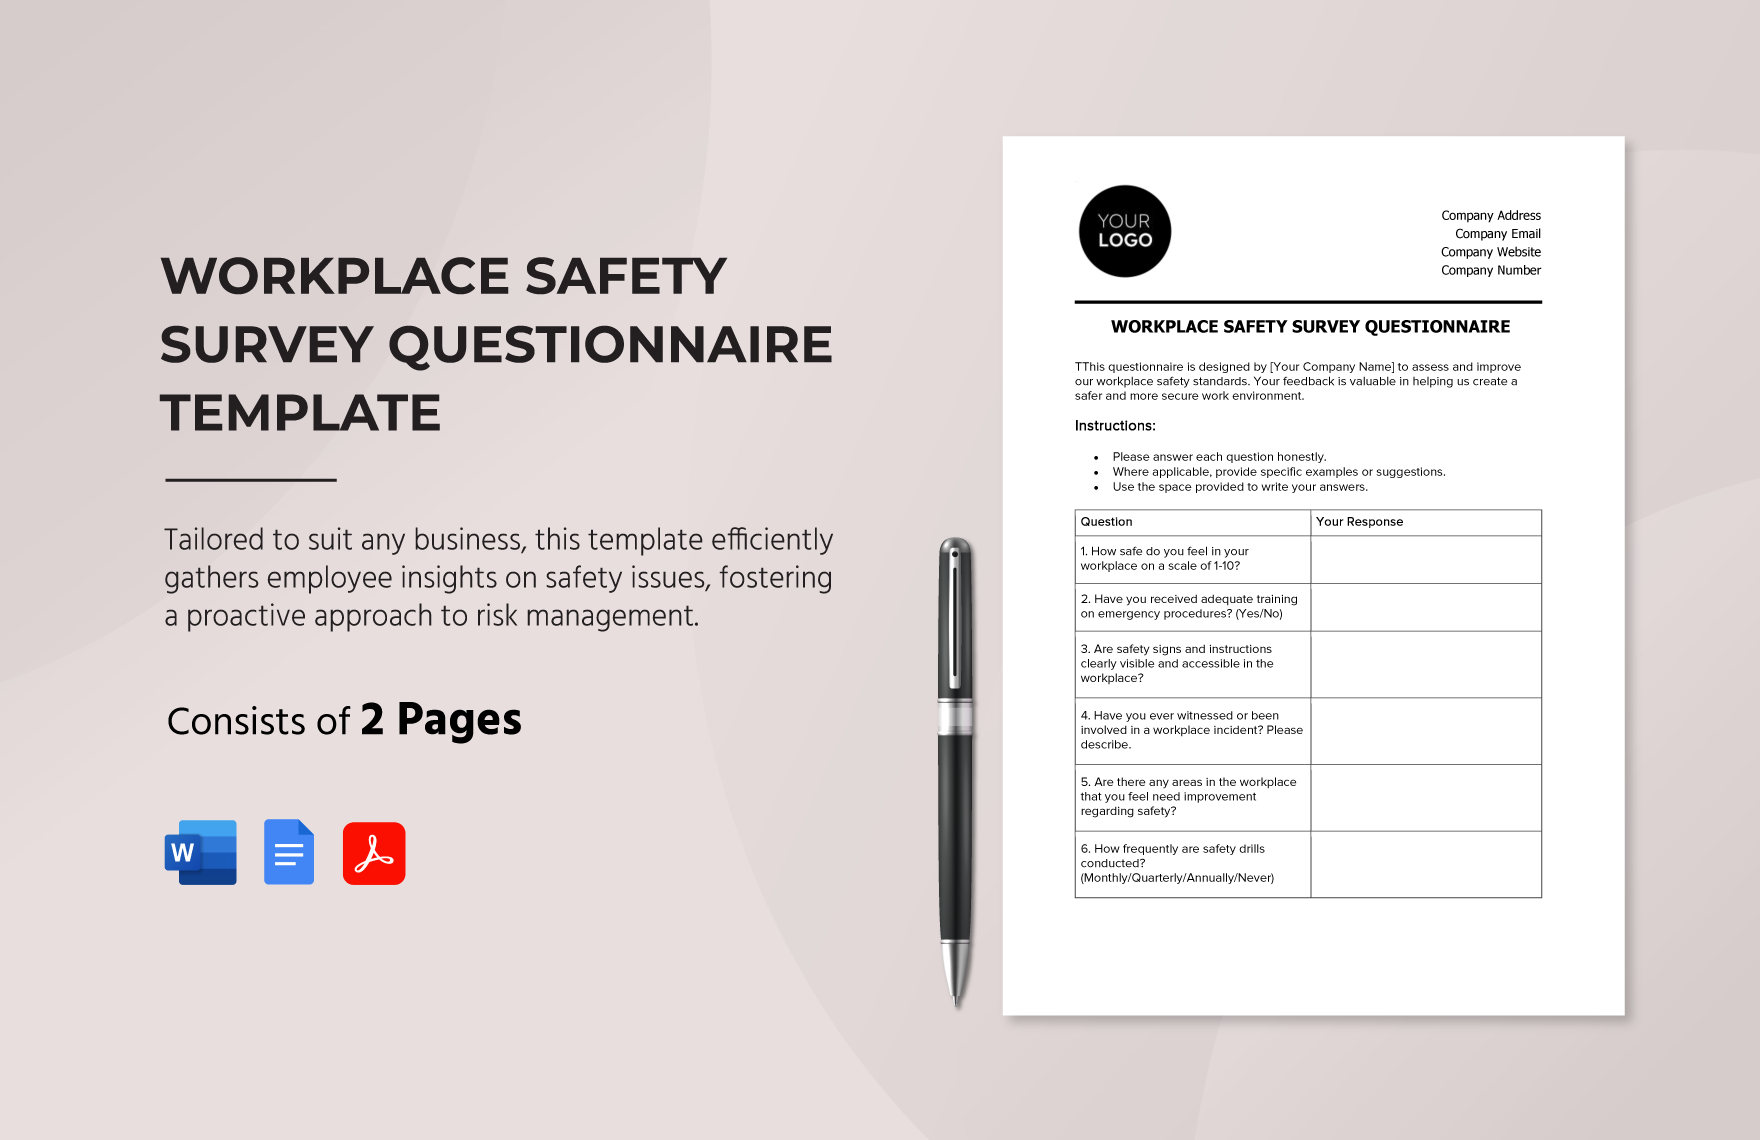 Workplace Safety Survey Questionnaire Template in Word, Google Docs, PDF